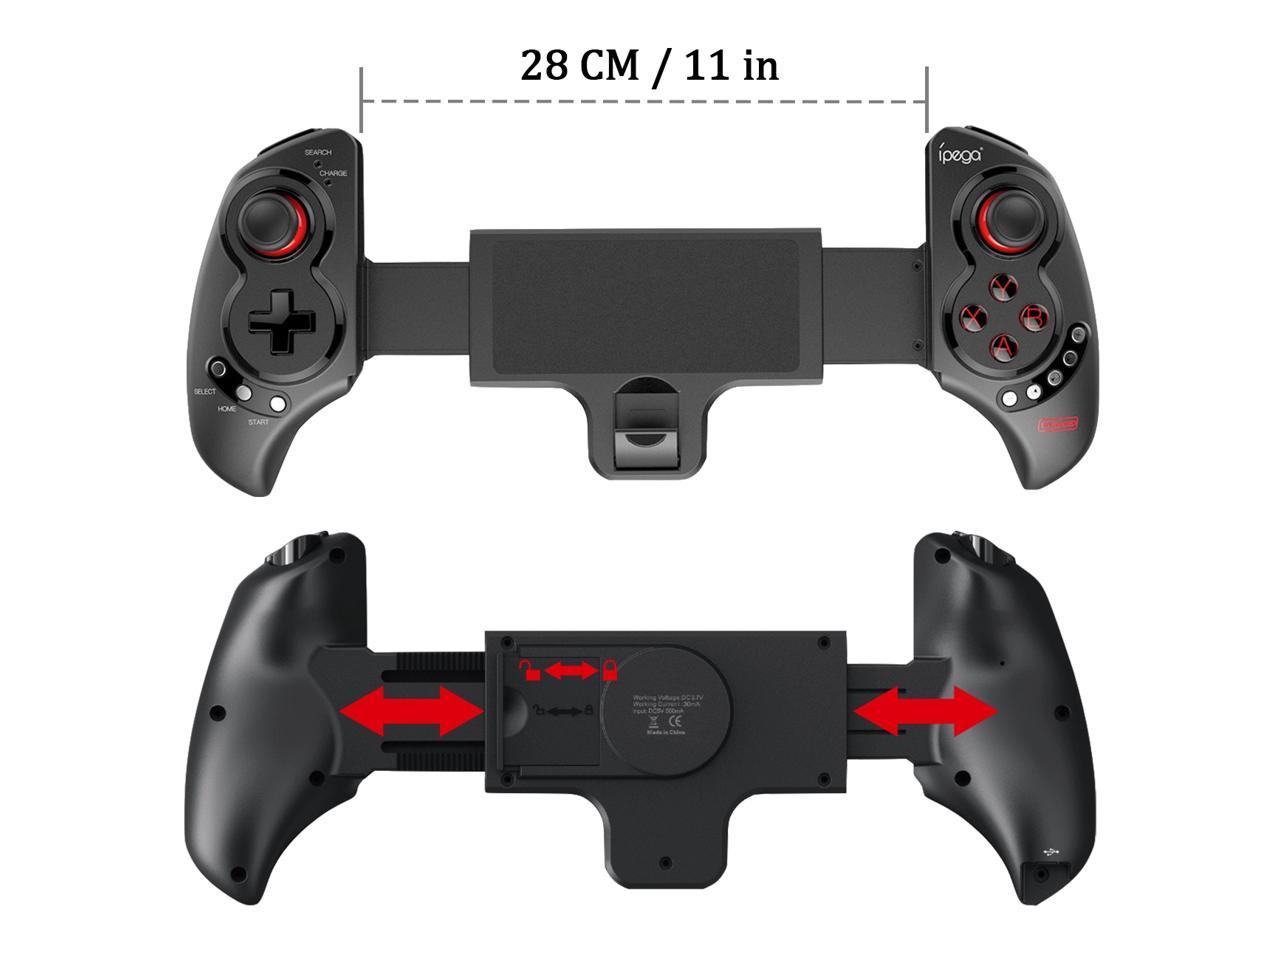 Wireless Bluetooth Game Controller Joypad for Samsung Galaxy S9 S8 S7 Note 8 5 